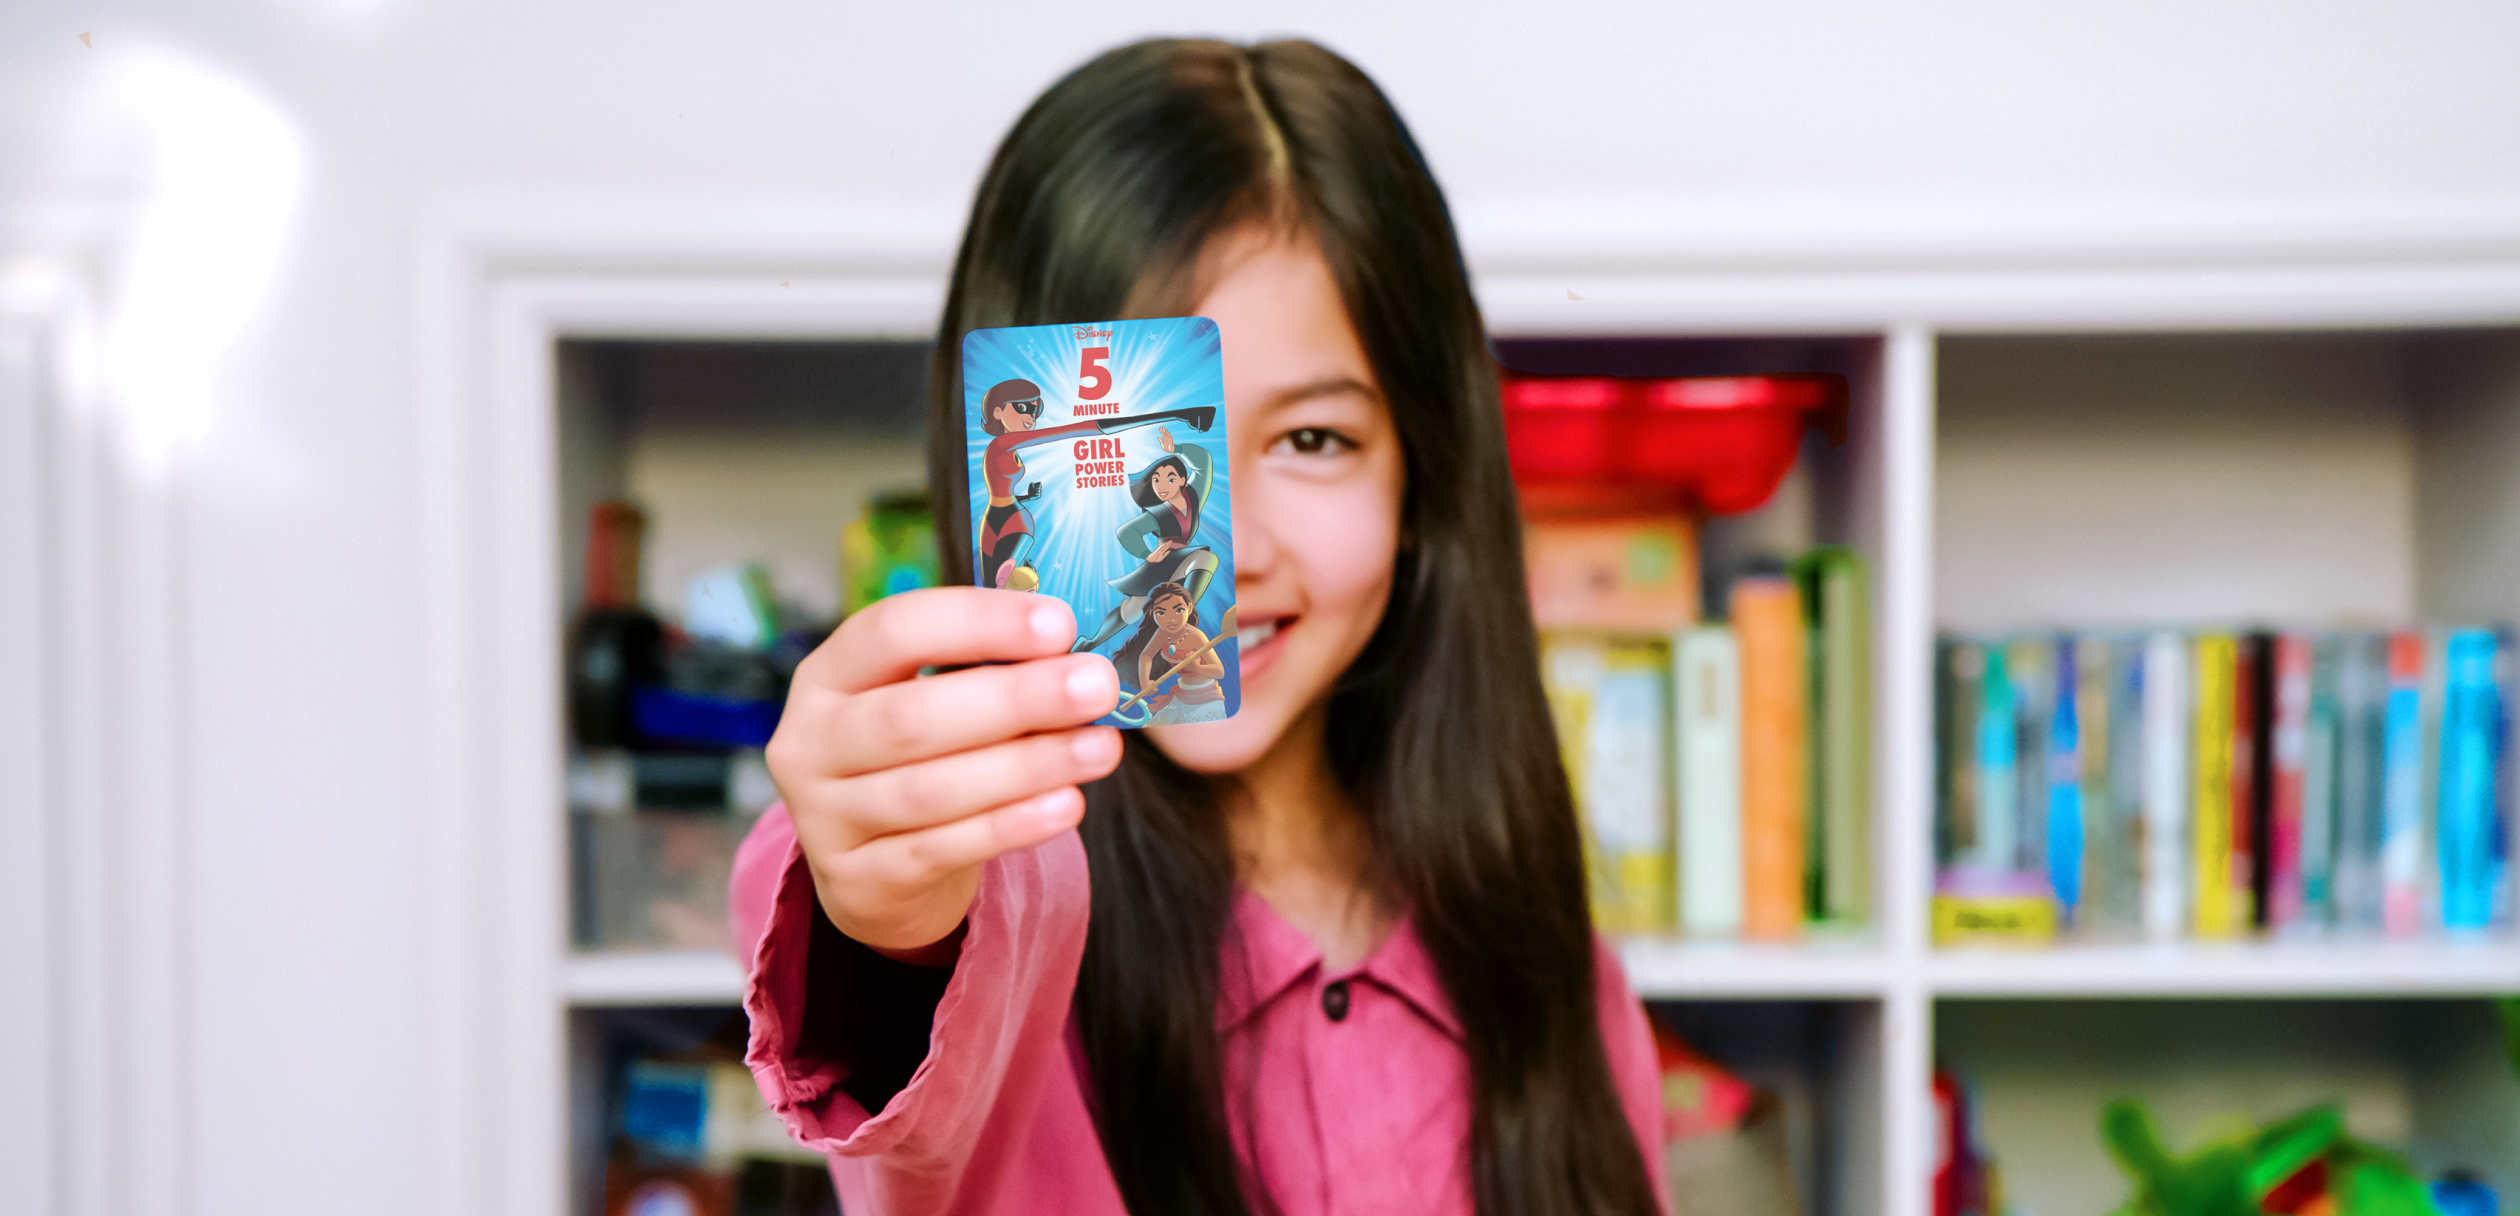 Girl holding the Disney 5 minute stories card